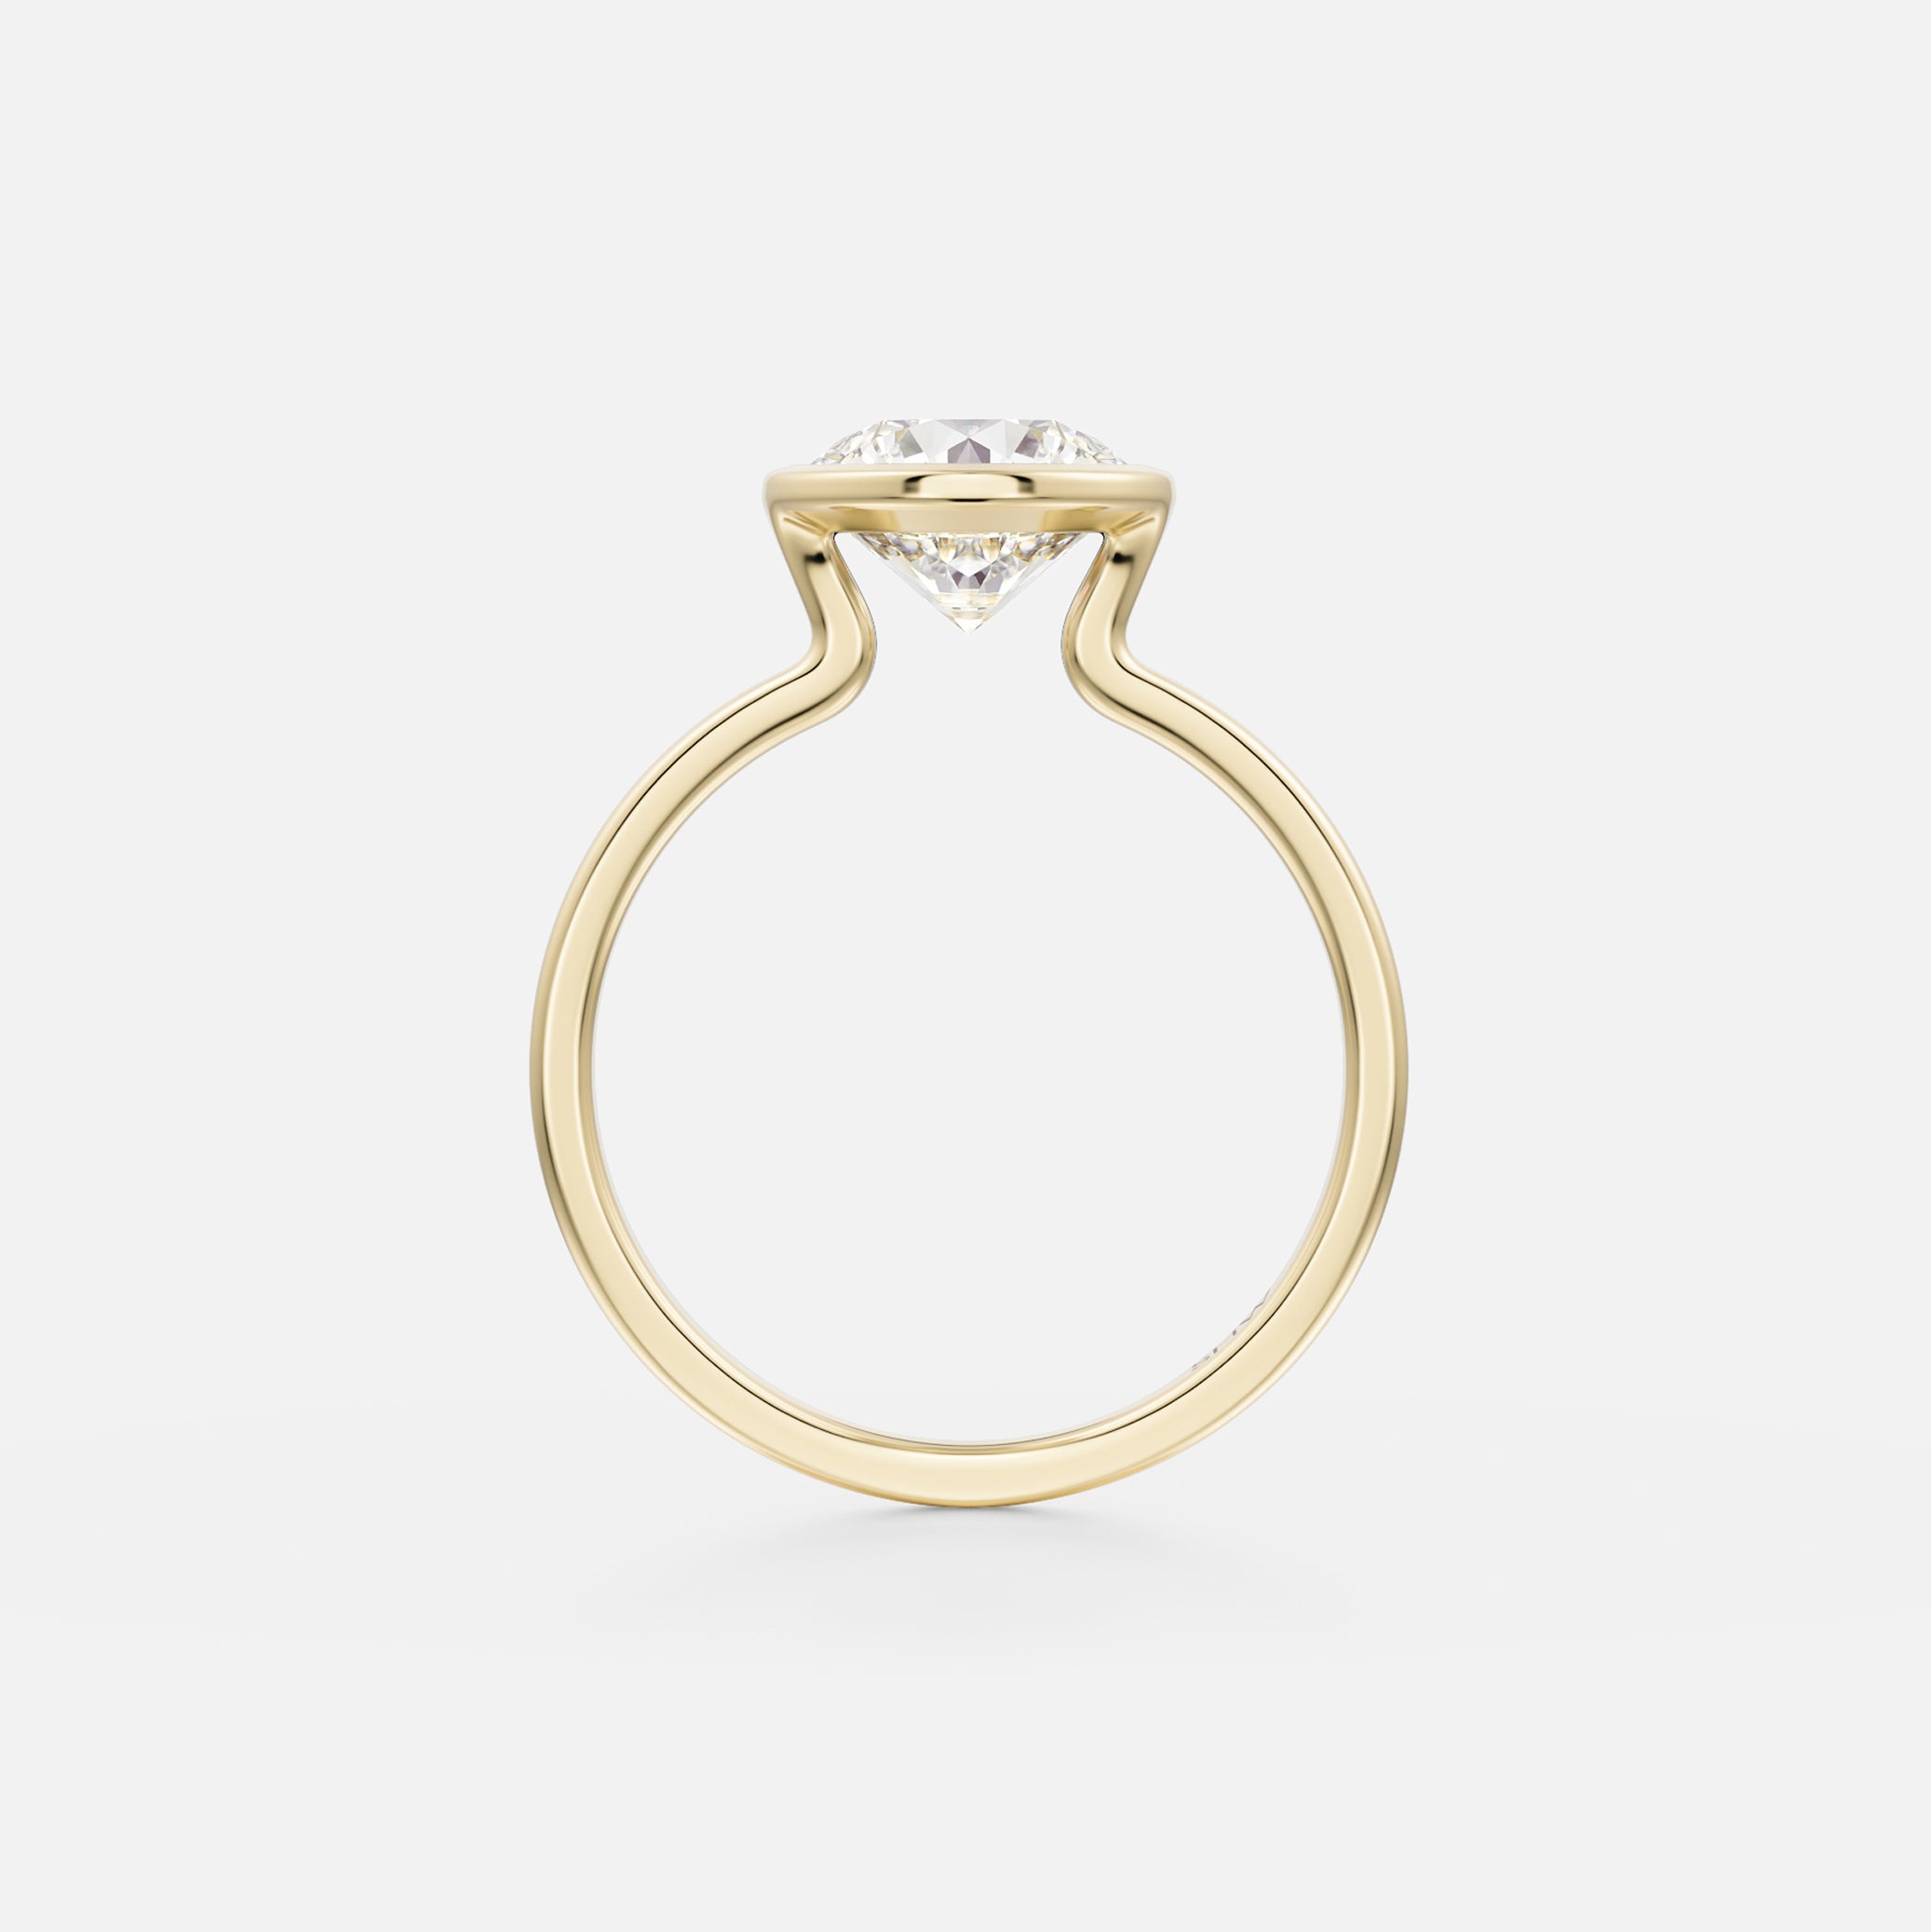 Mana Thin Flat Band with Round Modern Engagement Ring Setting in 14k yellow, white or rose Gold or platinum by SHW Fine Jewelry NYC